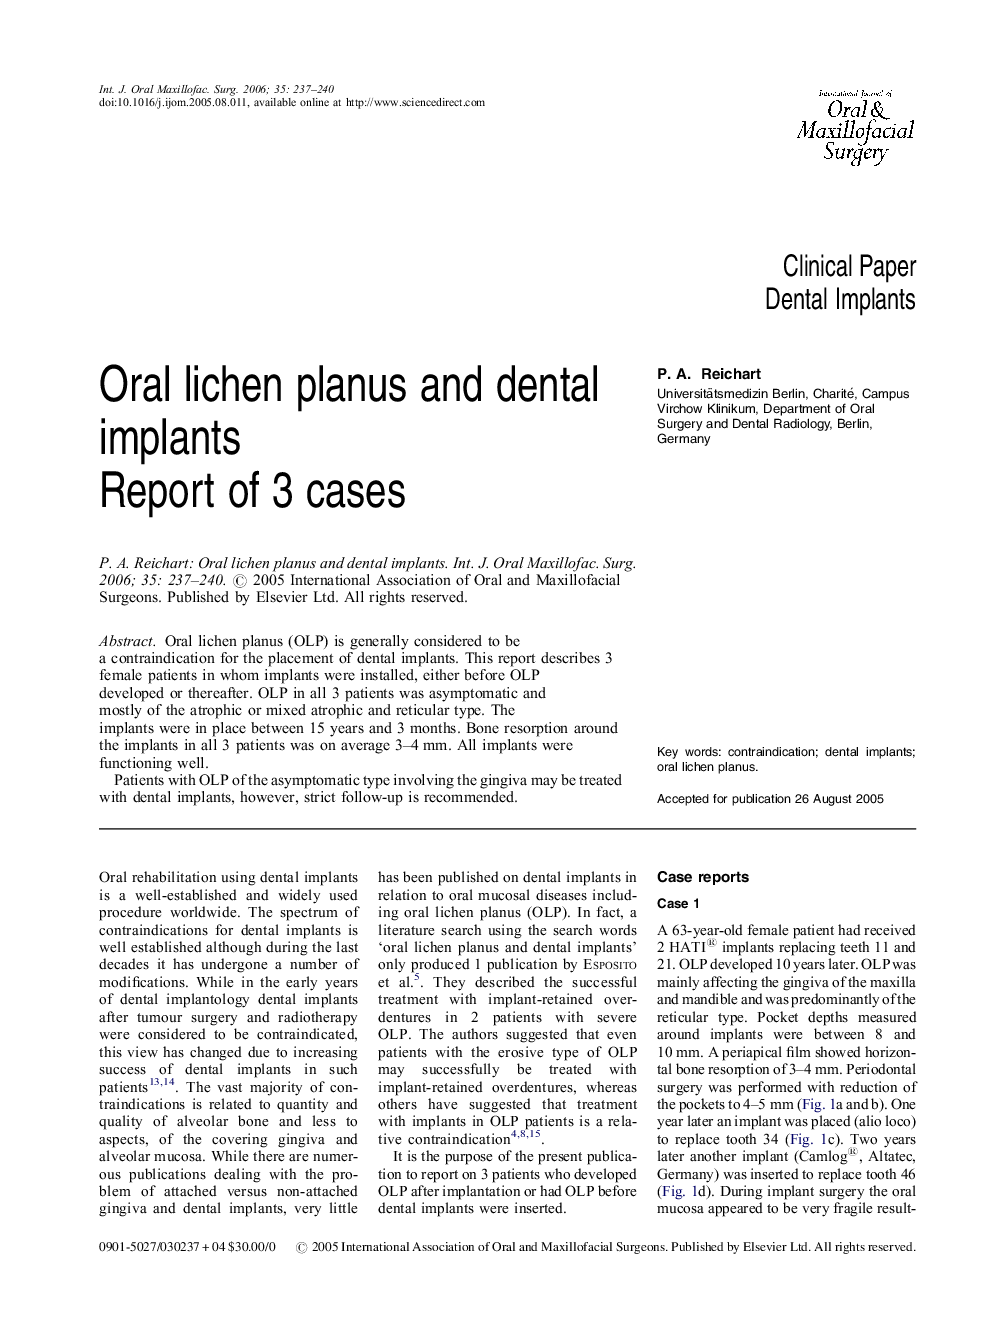 Oral lichen planus and dental implants: Report of 3 cases